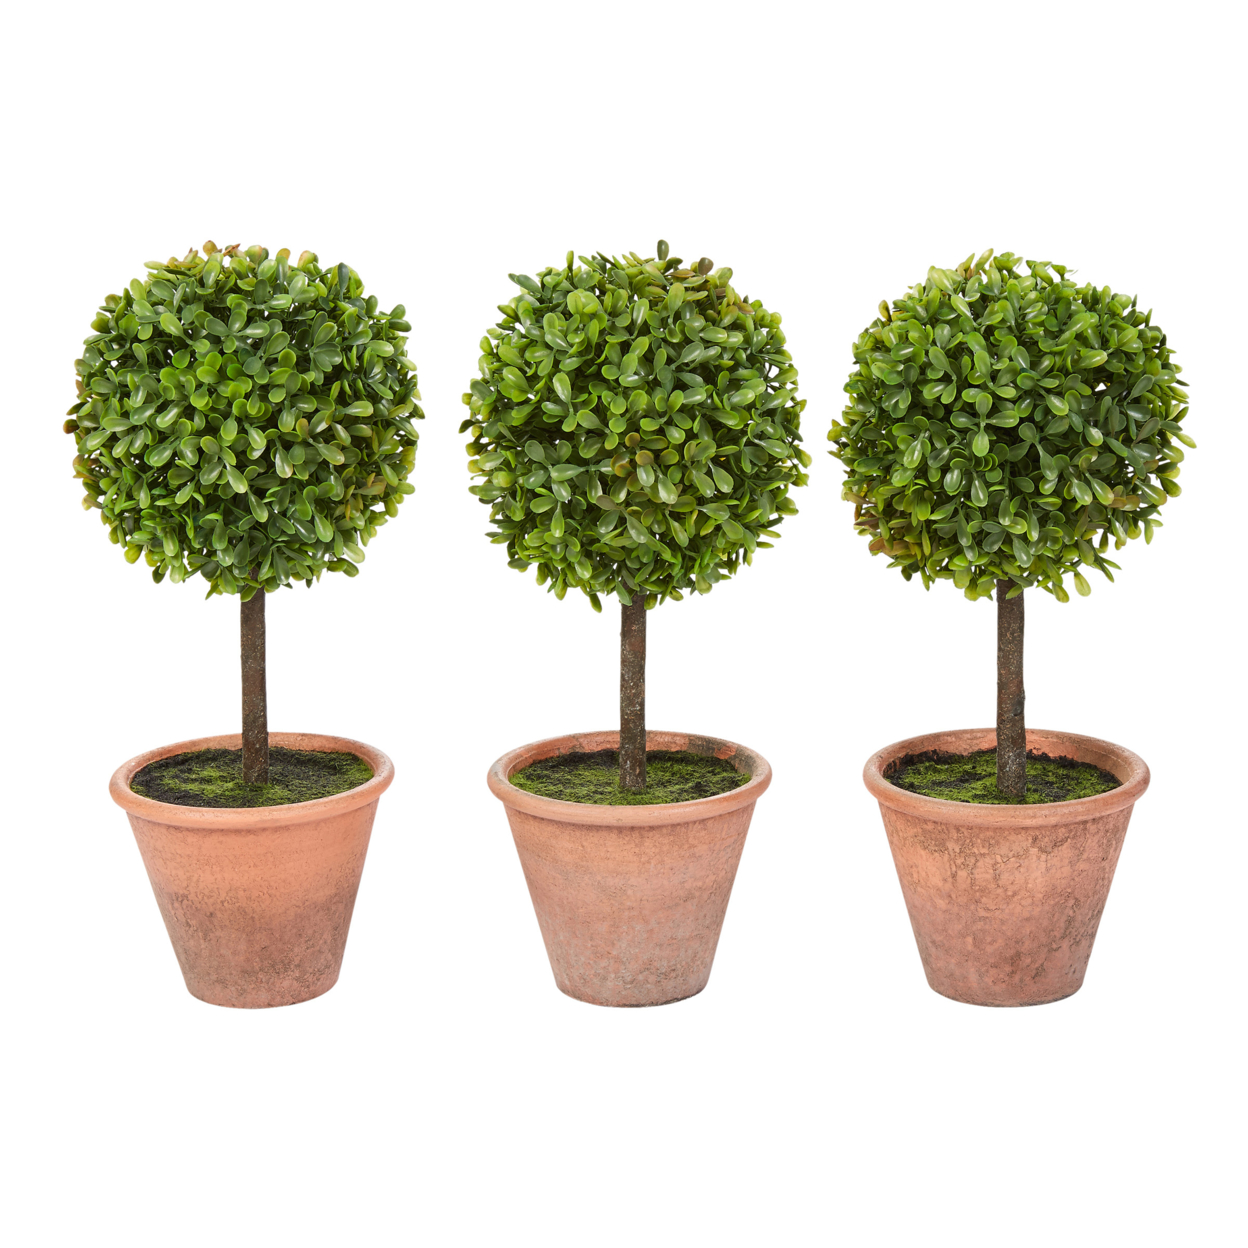 Faux Boxwood 3 Matching Realistic 11.5 Inch Tall Topiary Arrangements In Decorative Pots (Set Of 3)